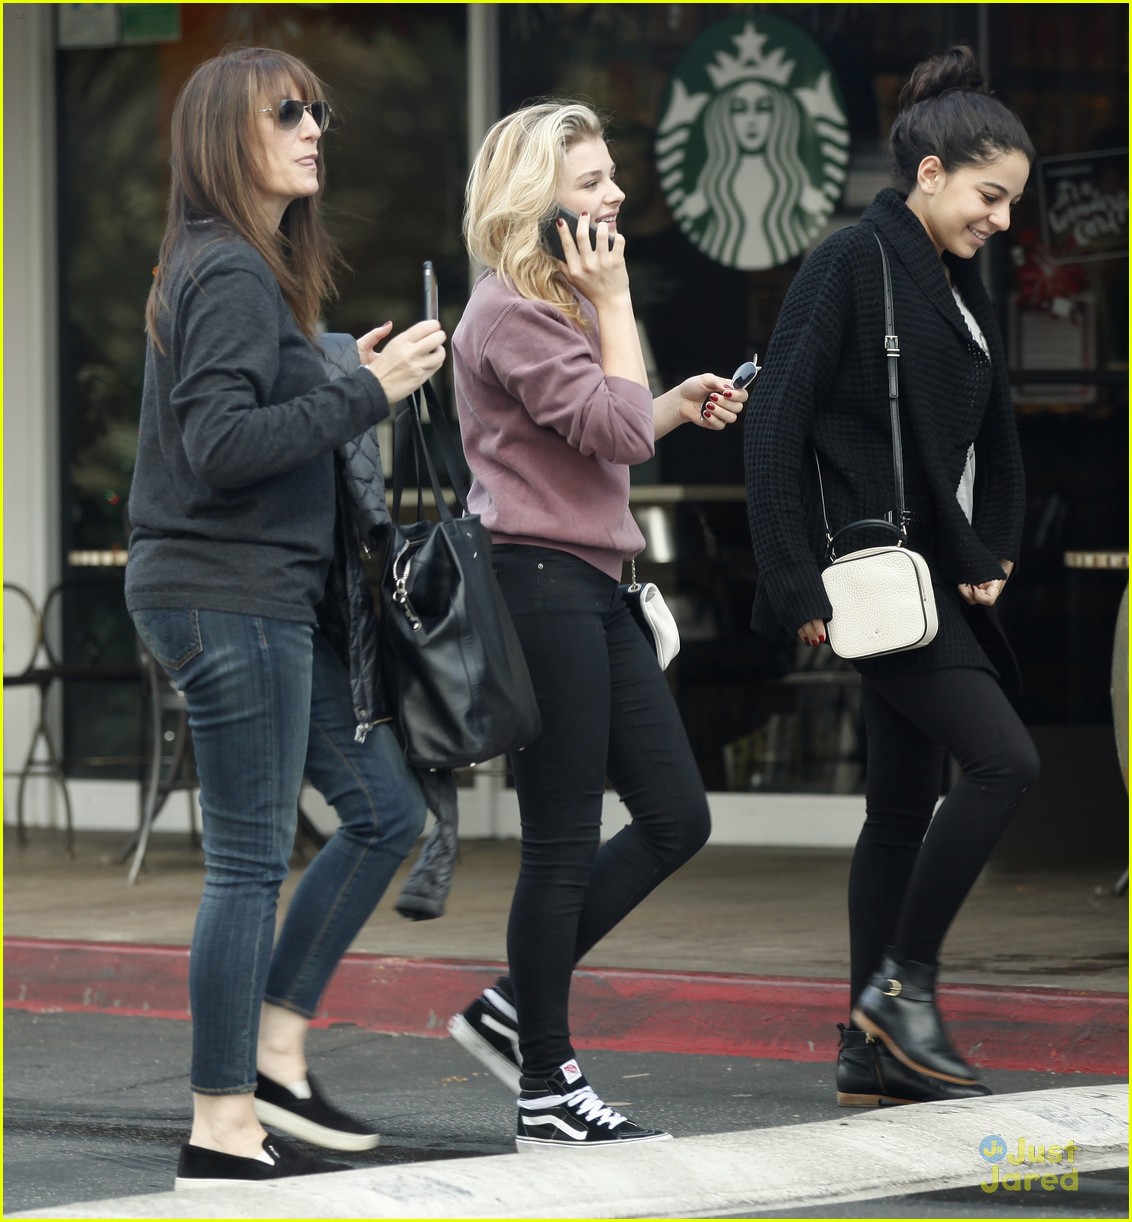 Chloe Moretz Ditches Her Knee Brace For Girl's Day Out: Photo